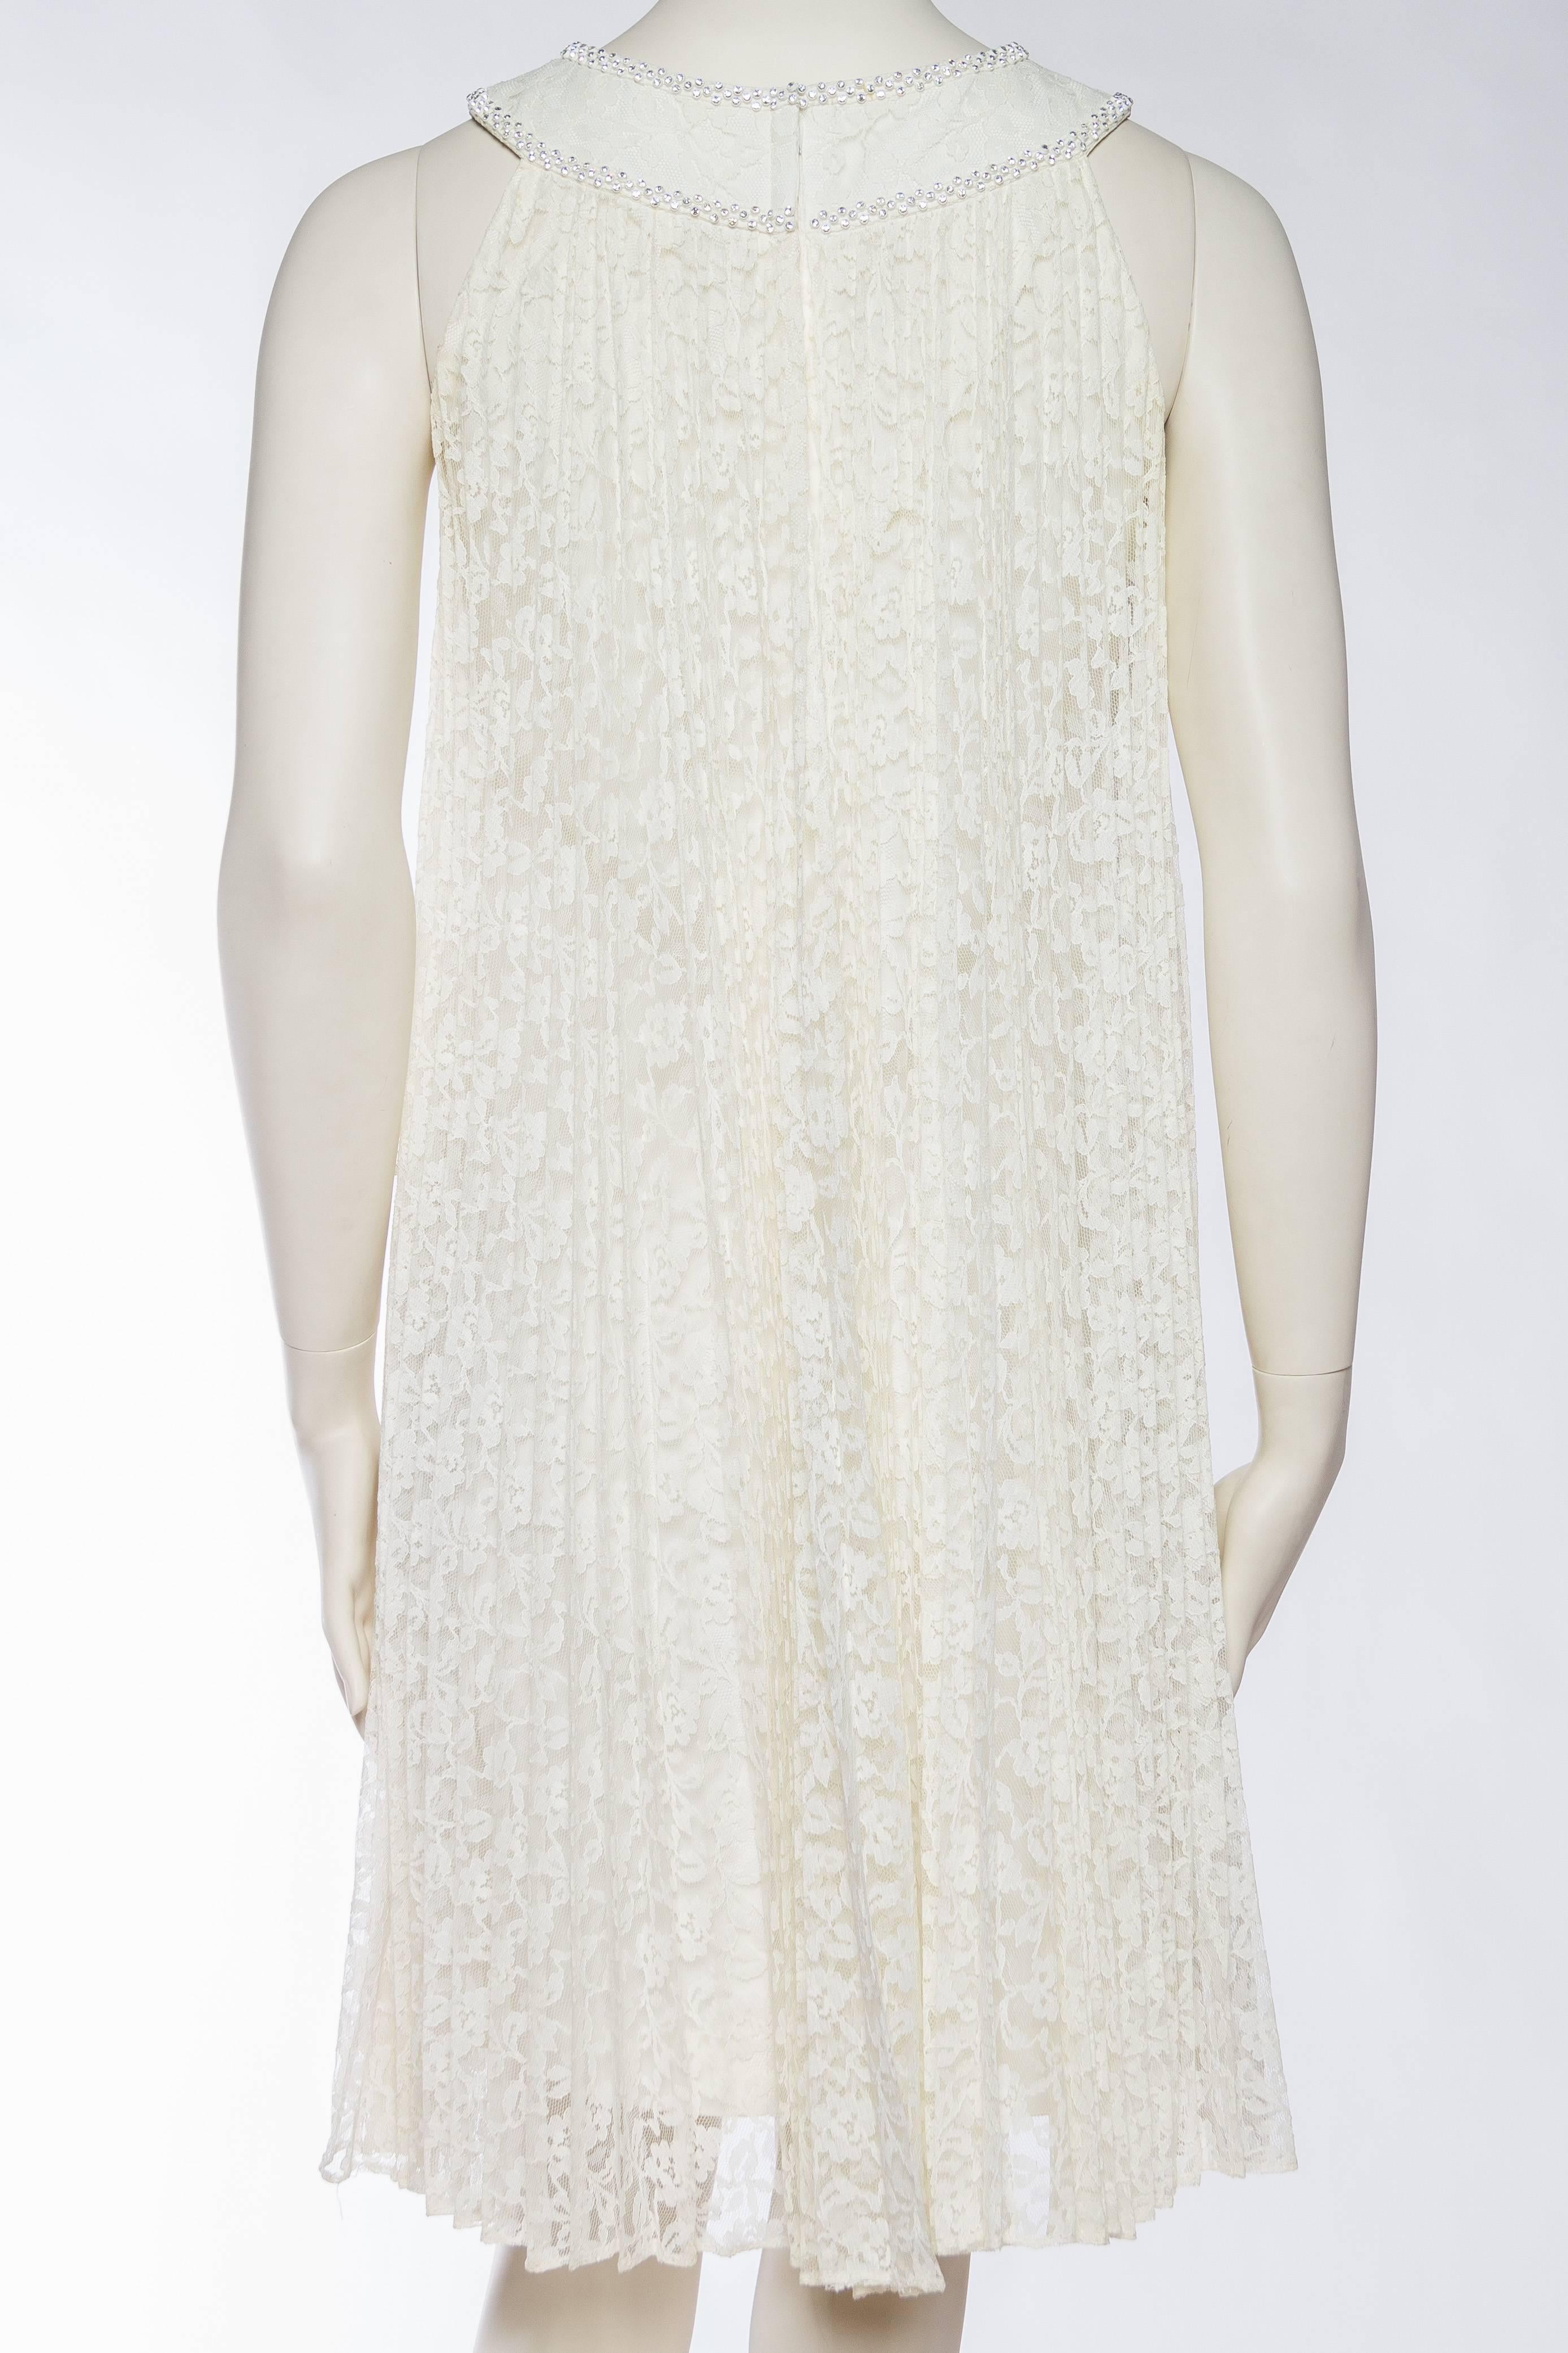 1960S White Pleated Rayon & Nylon Lace Mod Cocktail Dress With Crystal Neckline In Excellent Condition For Sale In New York, NY